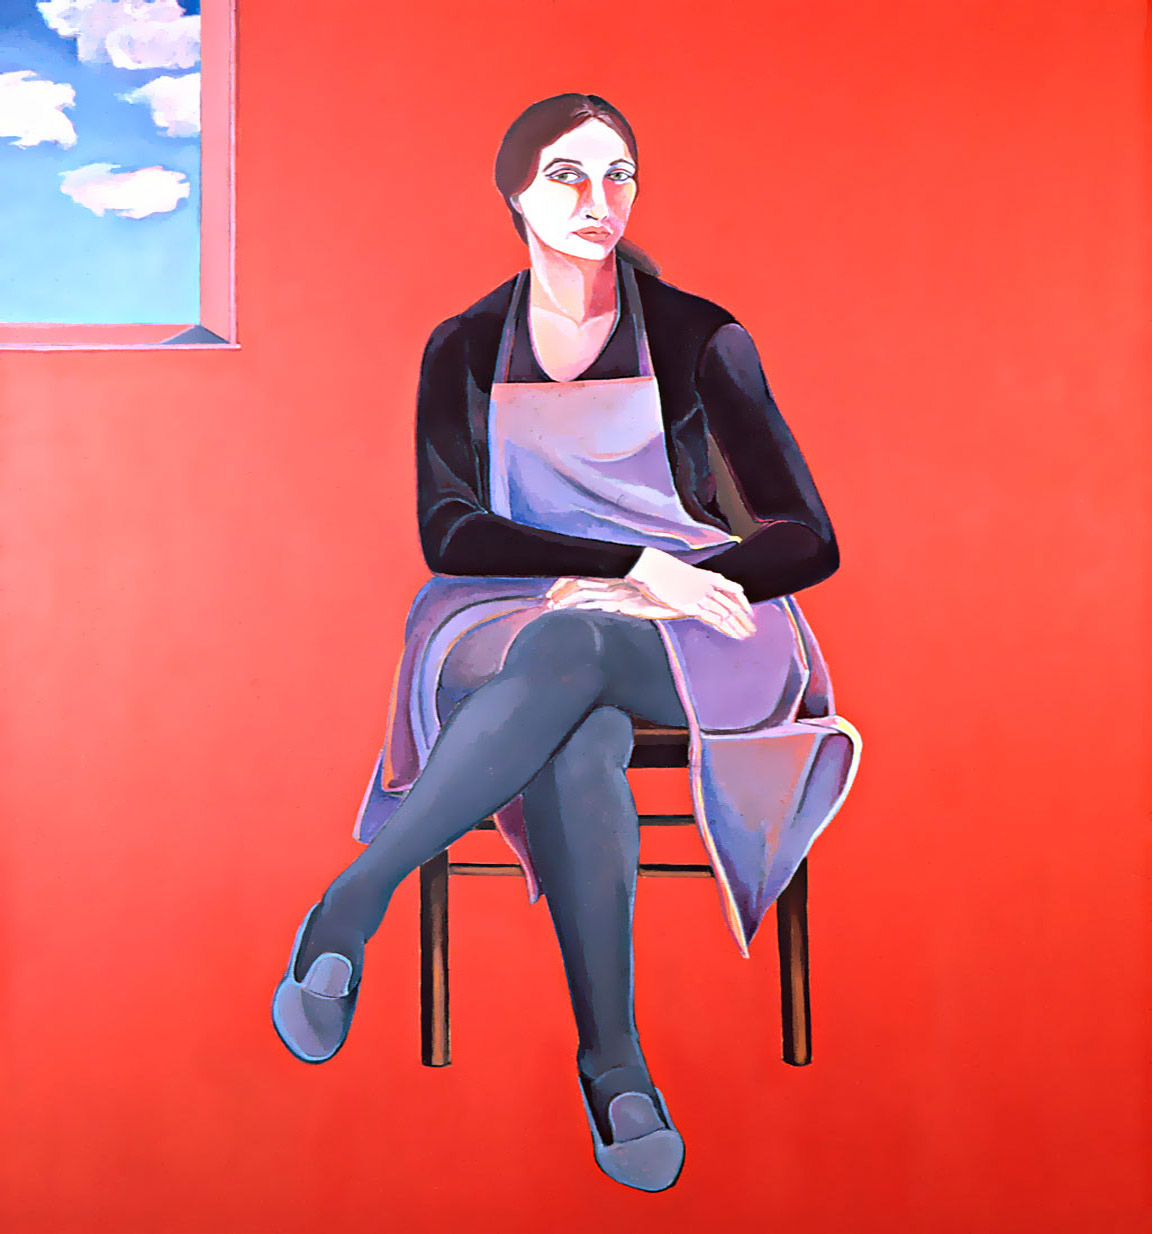 Thumbnail of Self Portrait Red Space by Ethel Fisher, 1968, oil on linen, 55 x 44 inches, twentieth century figure painting.